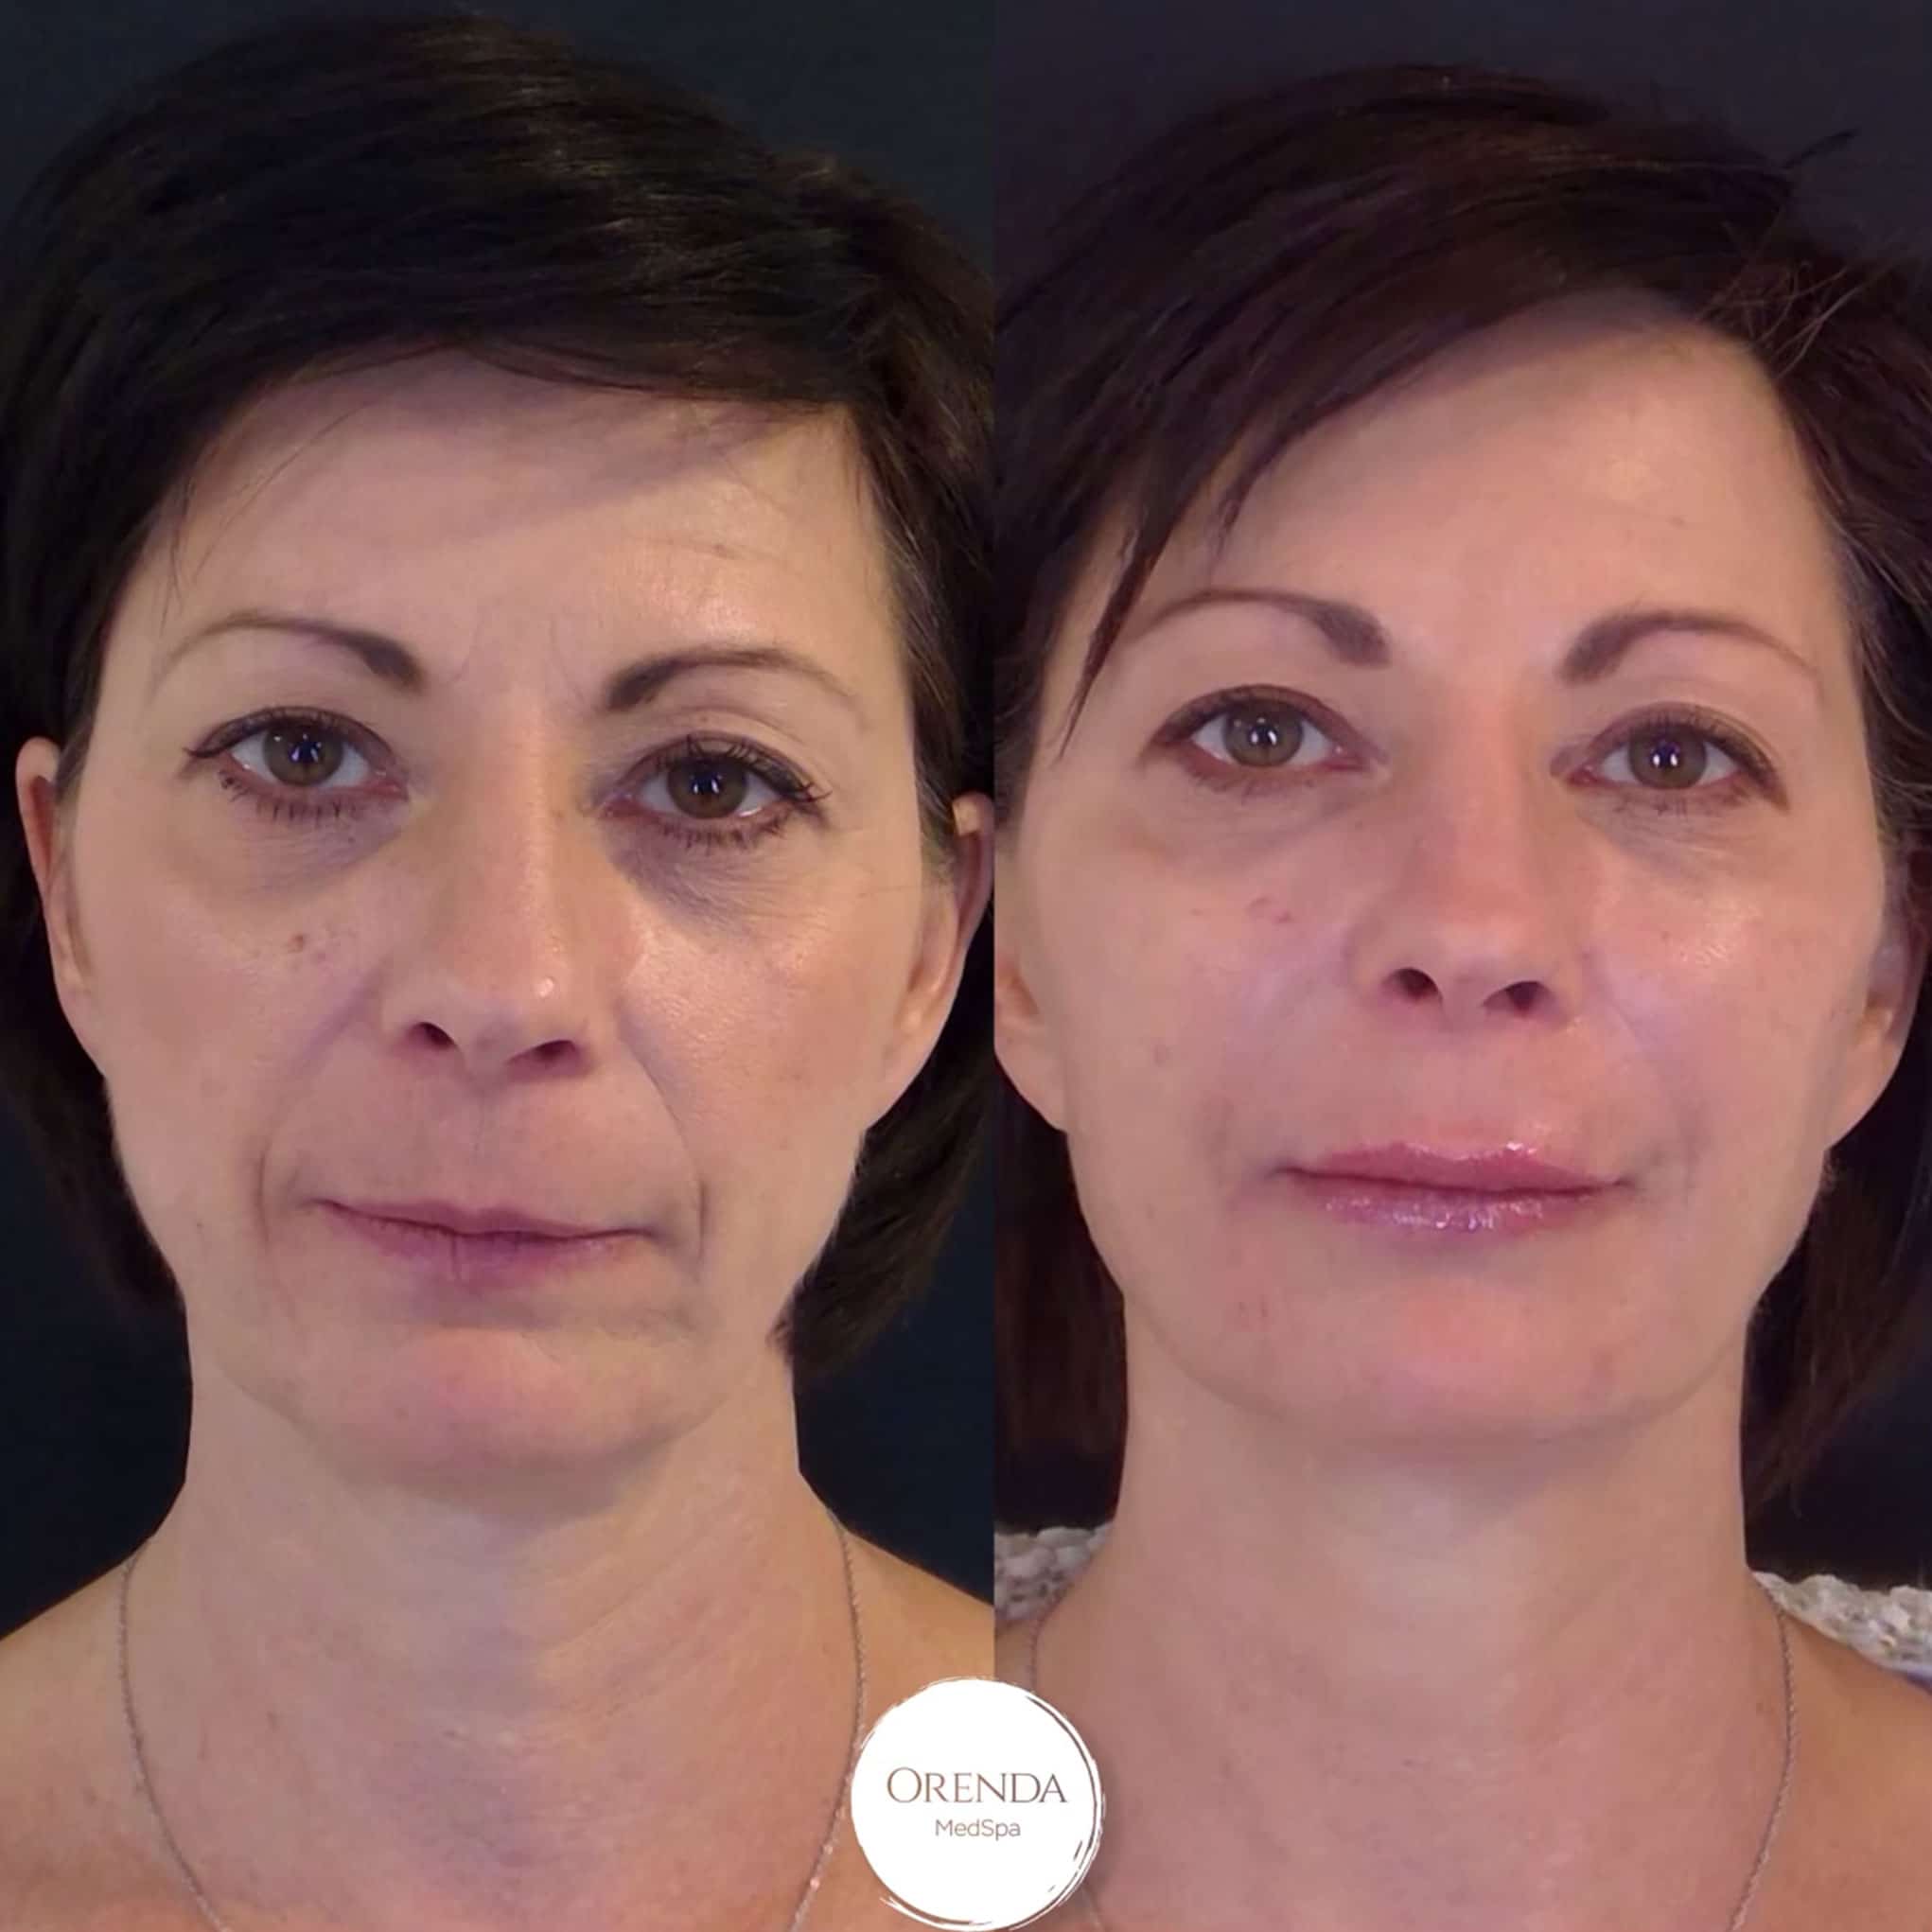 Non-surgical Face Lift before and after